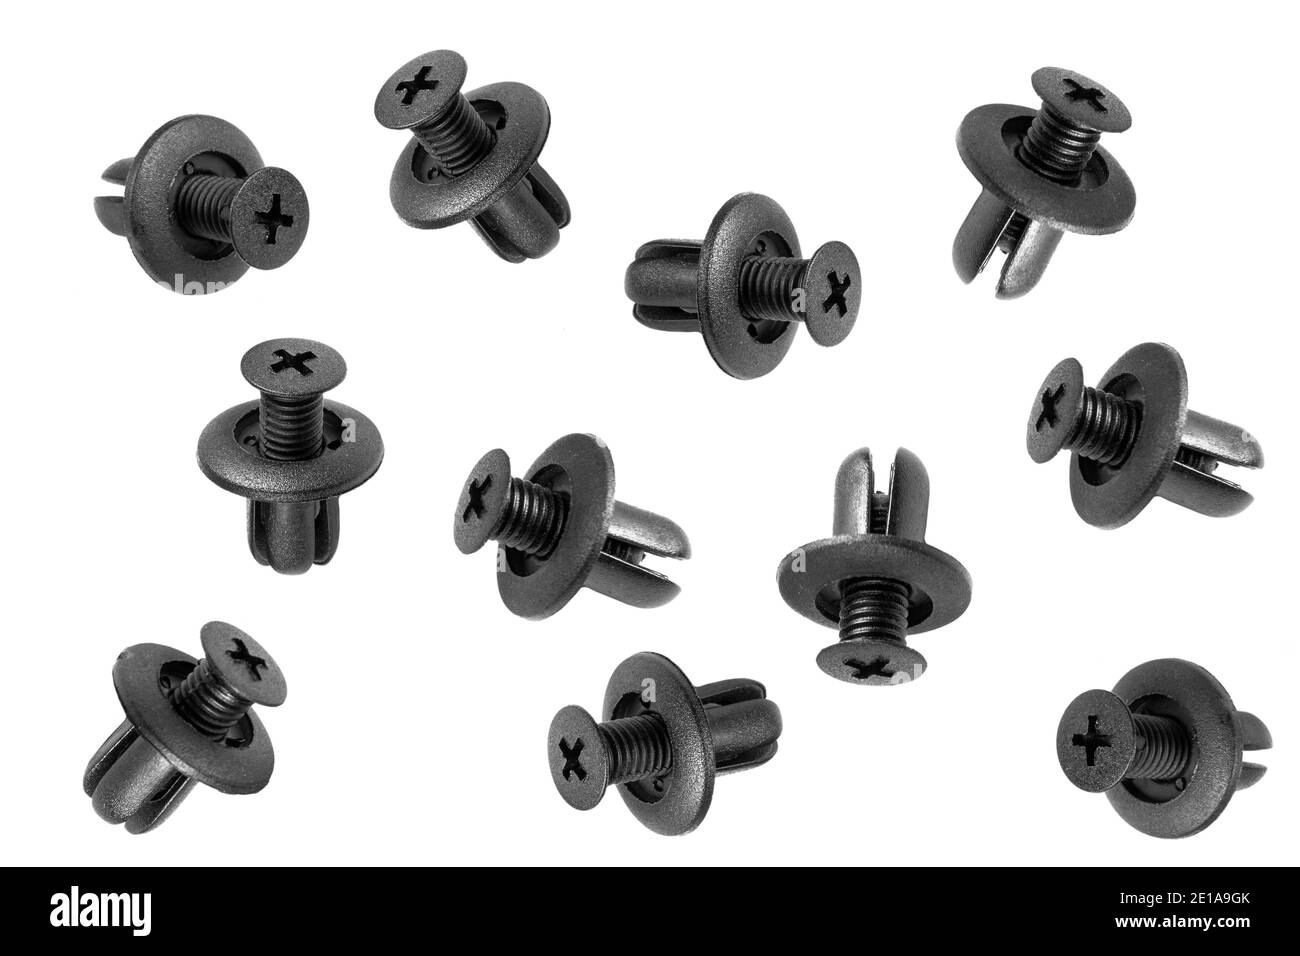 https://c8.alamy.com/comp/2E1A9GK/macro-shot-plastic-black-clips-for-the-car-panel-plastic-rivets-isolated-on-a-white-background-automotive-clips-auto-plastic-fasteners-clip-or-au-2E1A9GK.jpg